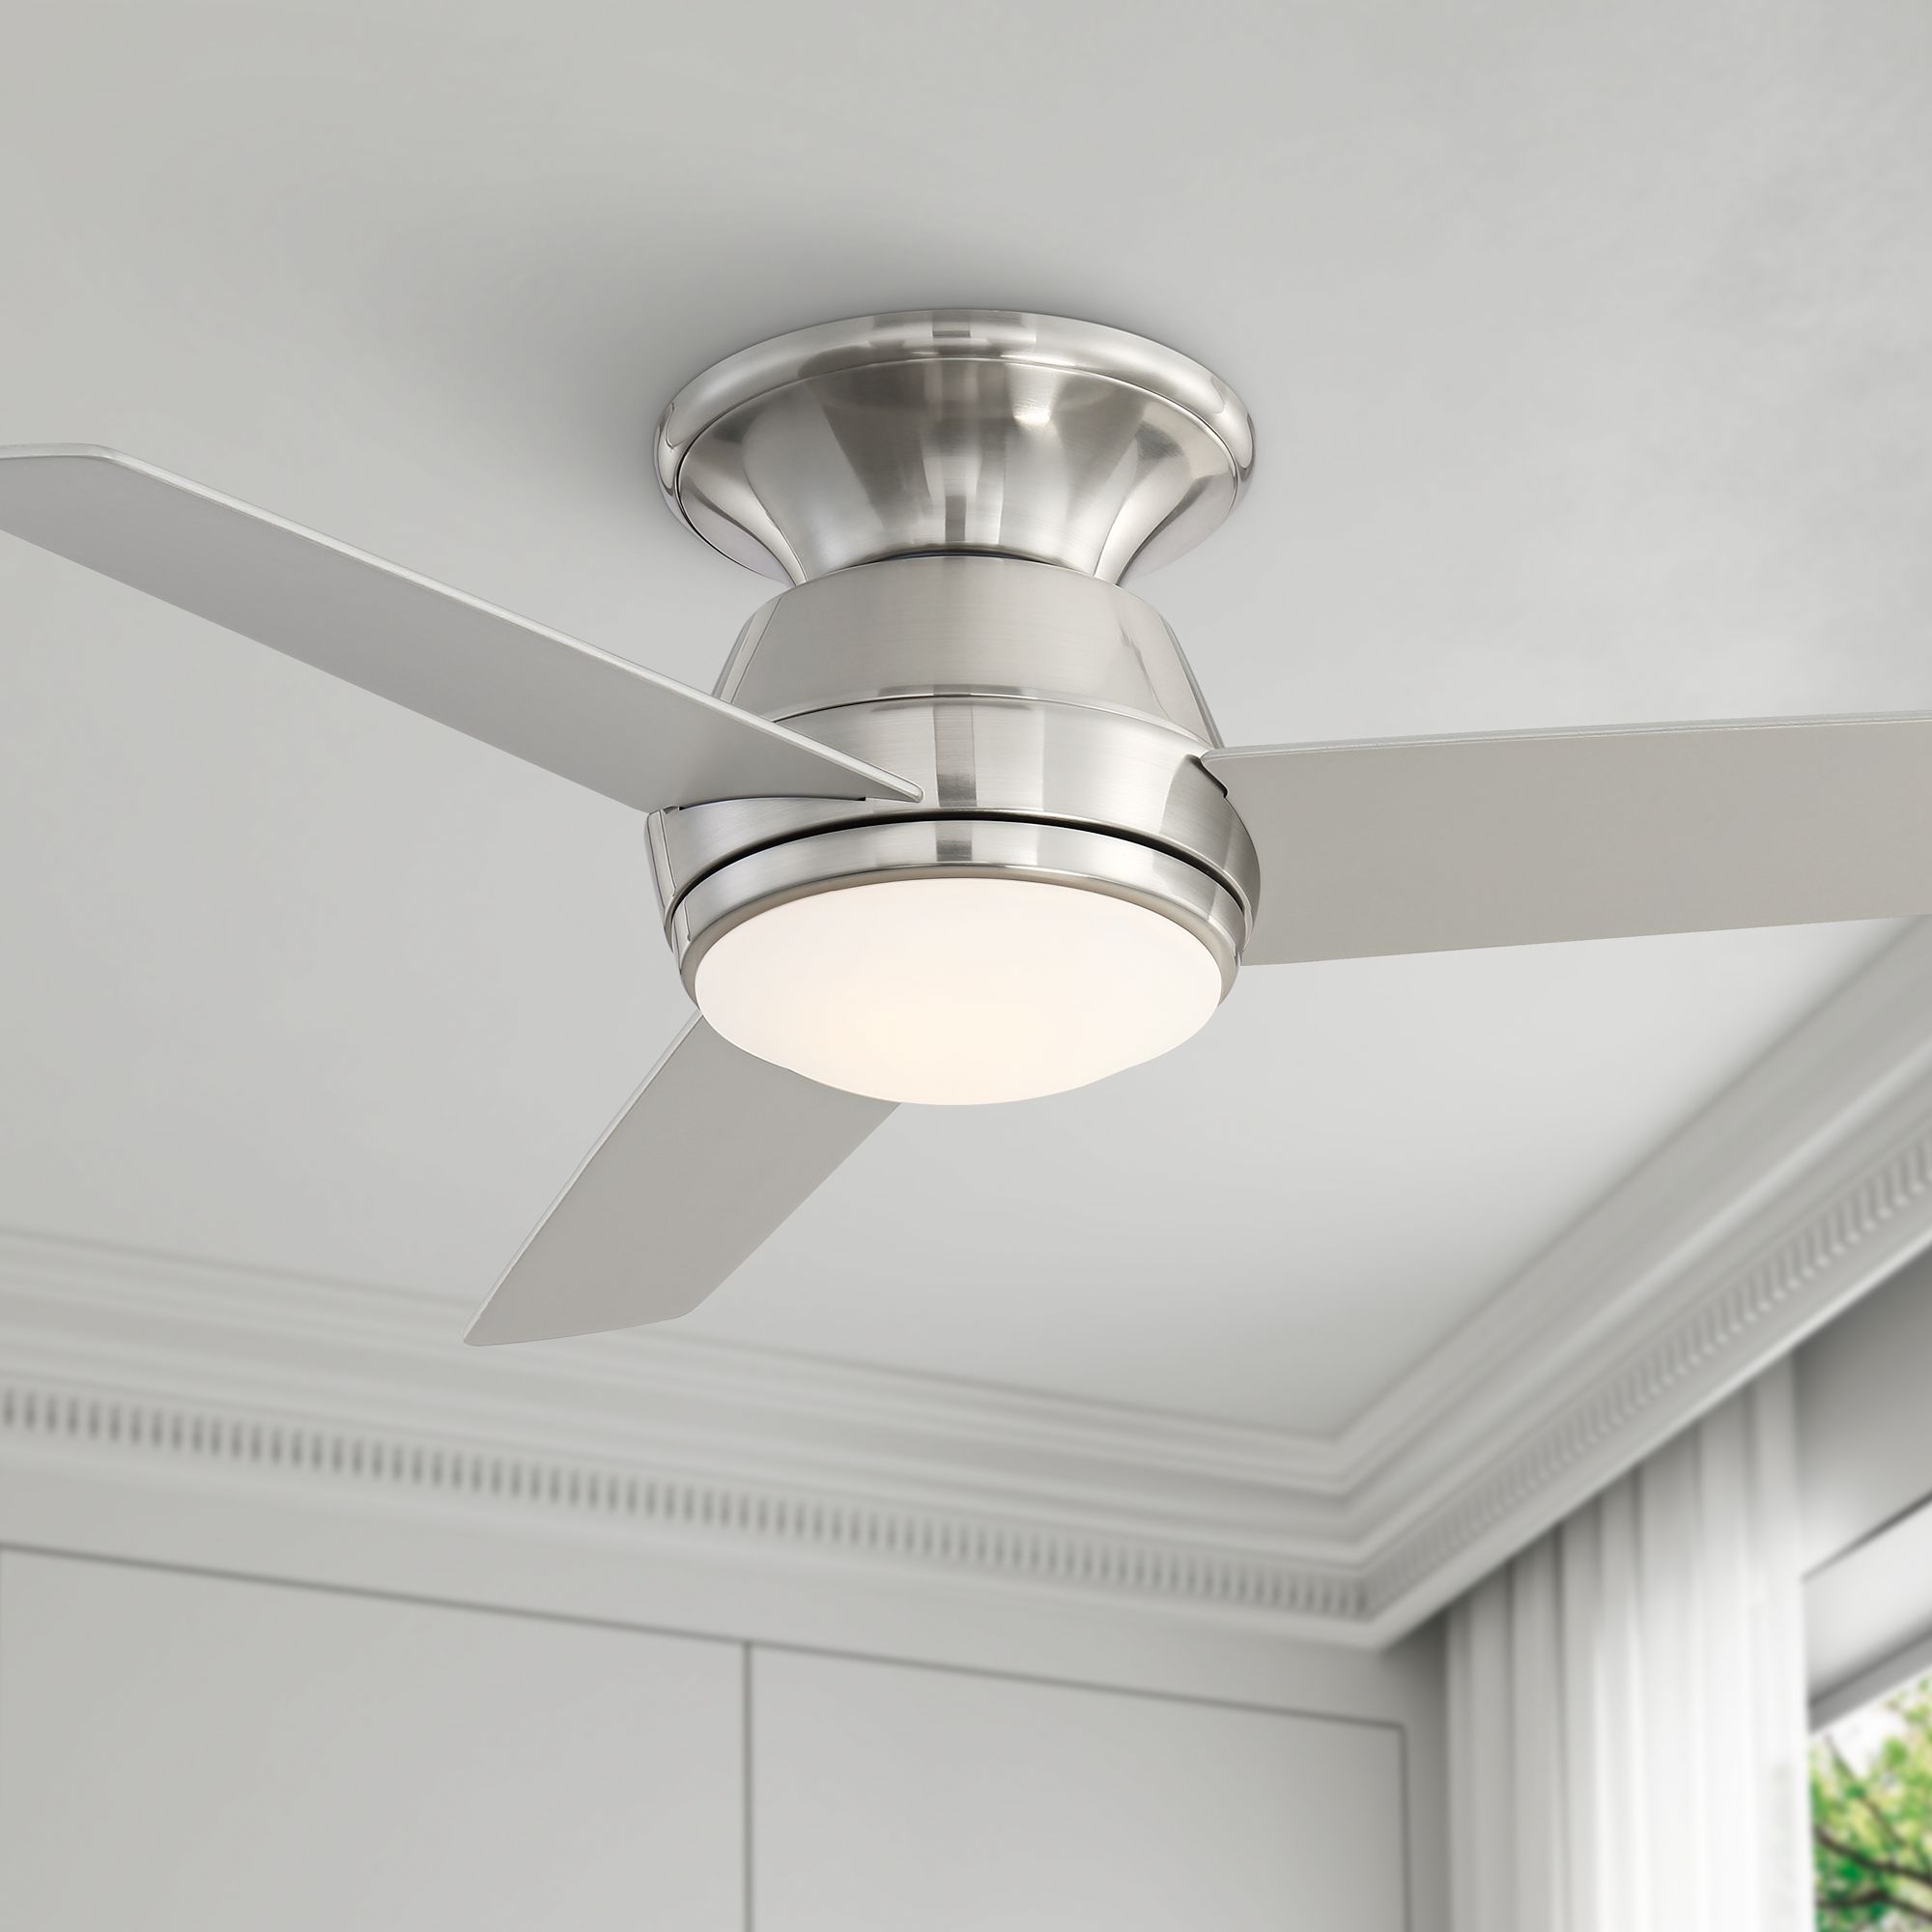 Brushed Nickel Ceiling Fans | Lamps Plus